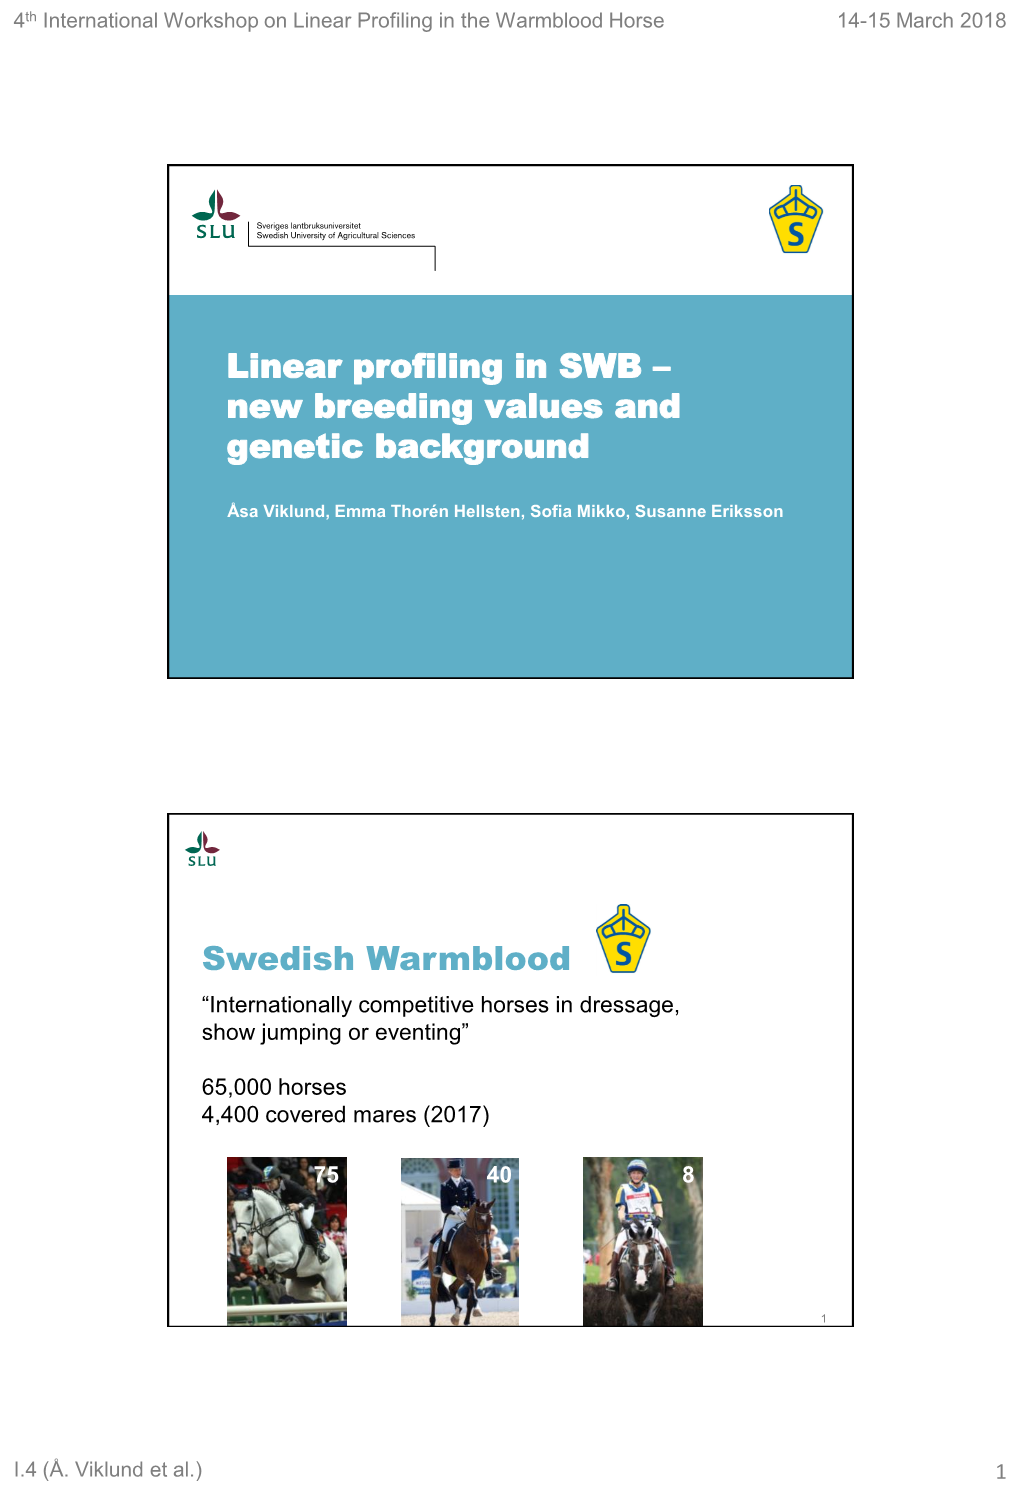 Linear Profiling in SWB – New Breeding Values and Genetic Background